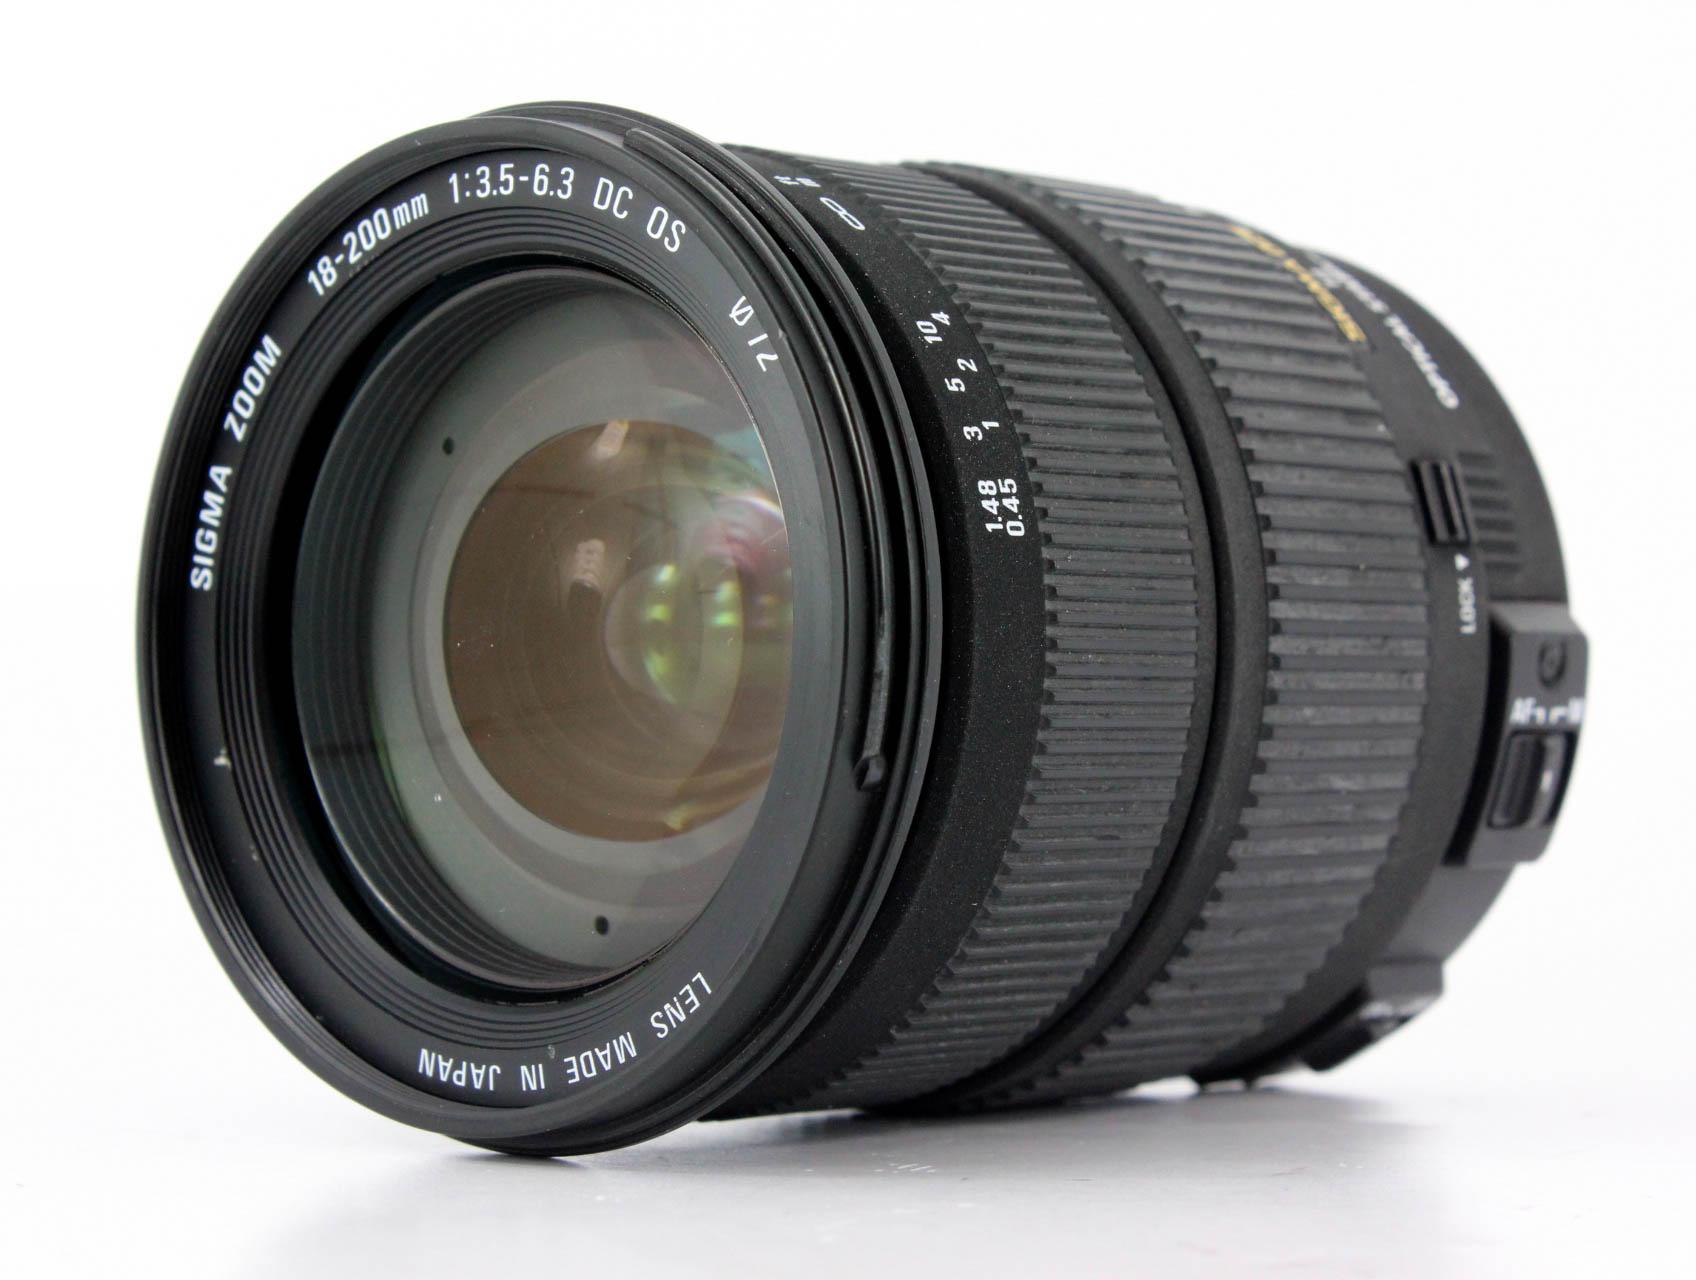 Sigma 18-200mm f/3.5-6.3 DC OS Canon EF-S Fit Lens - Lenses and Cameras